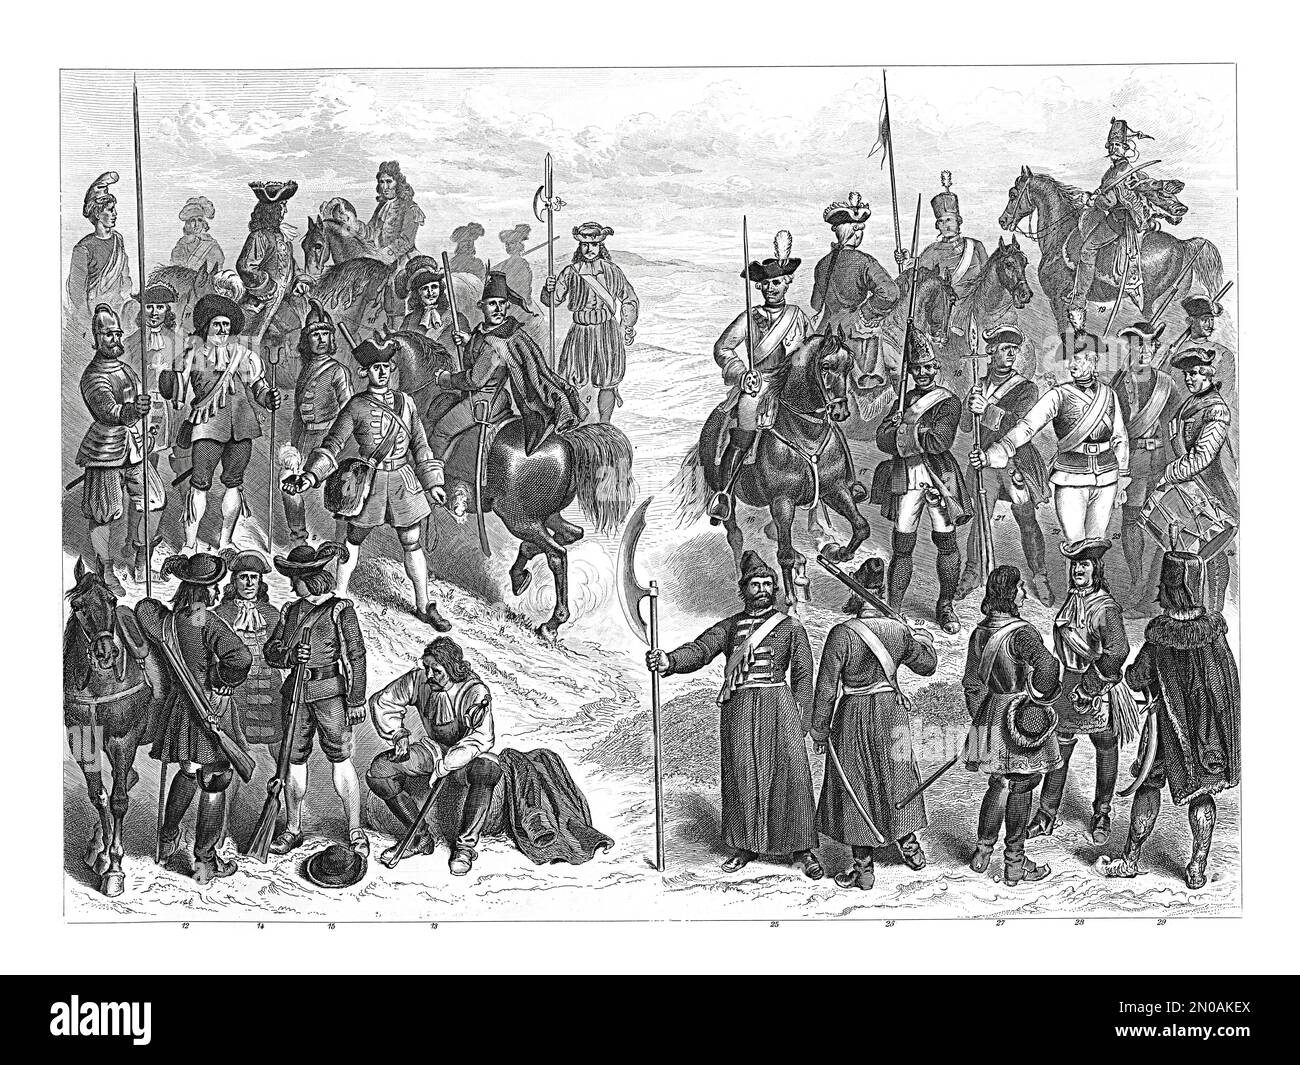 19th-century engraving of European military units, XVII-XVII. French troops (1-11): 1. Hussar; 2. Officer; 3. Pikiner; 4. Musketeer; 5,6. Grenadiers; Stock Photo